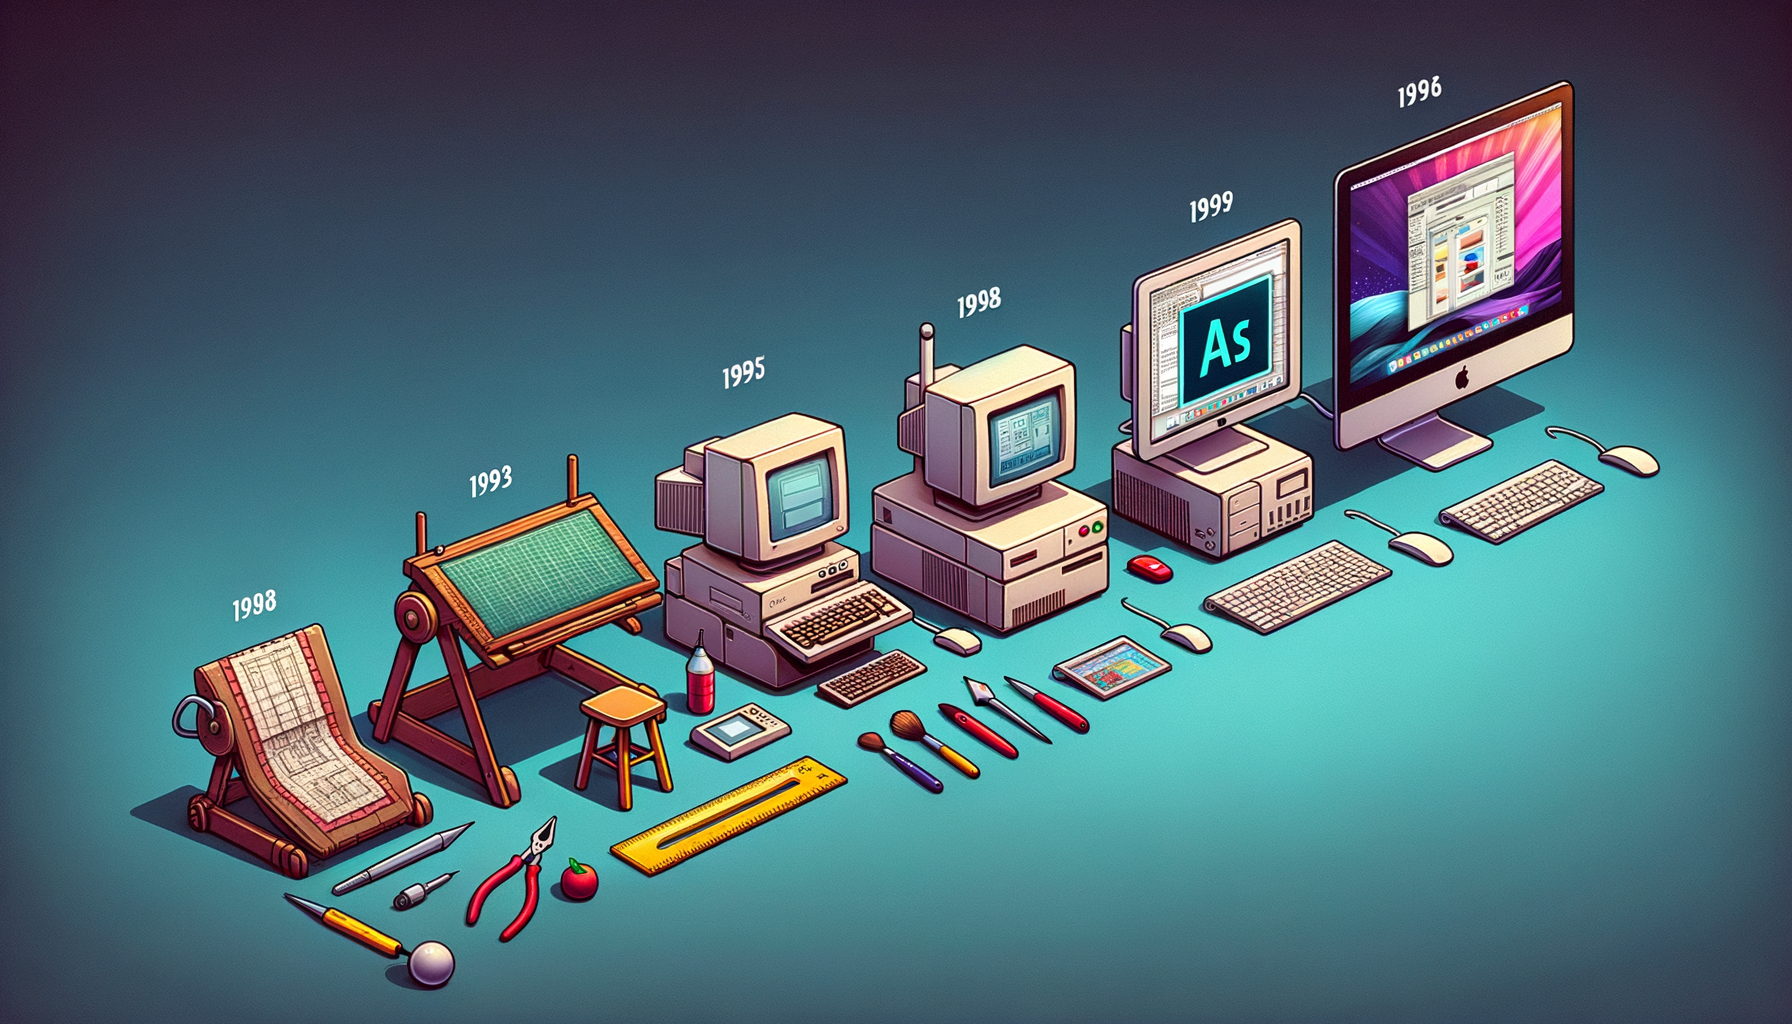 Design Software History: The Evolution of Design Software: From Early Tools to Adobe's Innovations